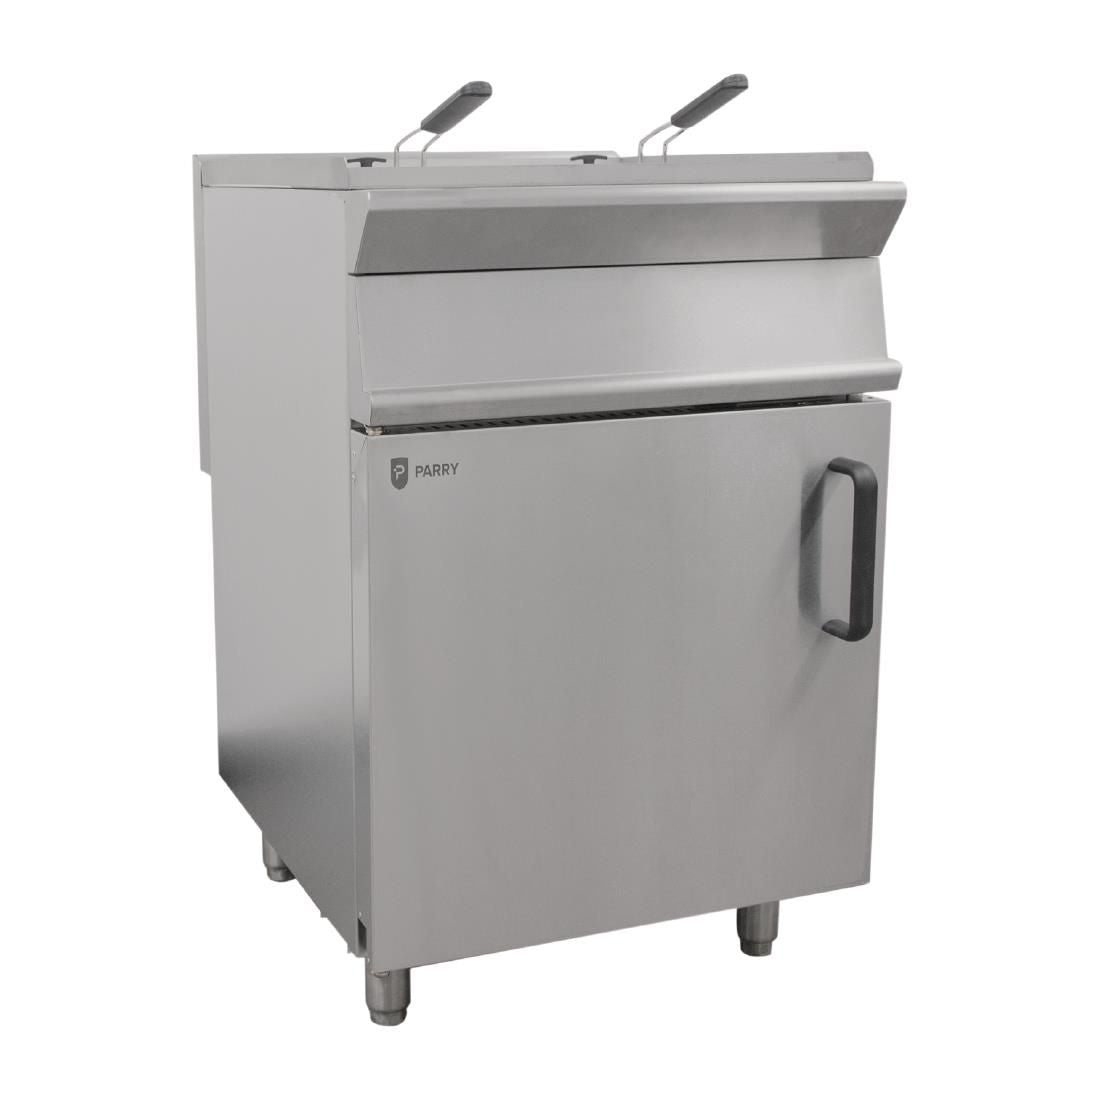 Parry Twin Tank Twin Basket Free Standing Natural/LPG Gas Fryer GDF